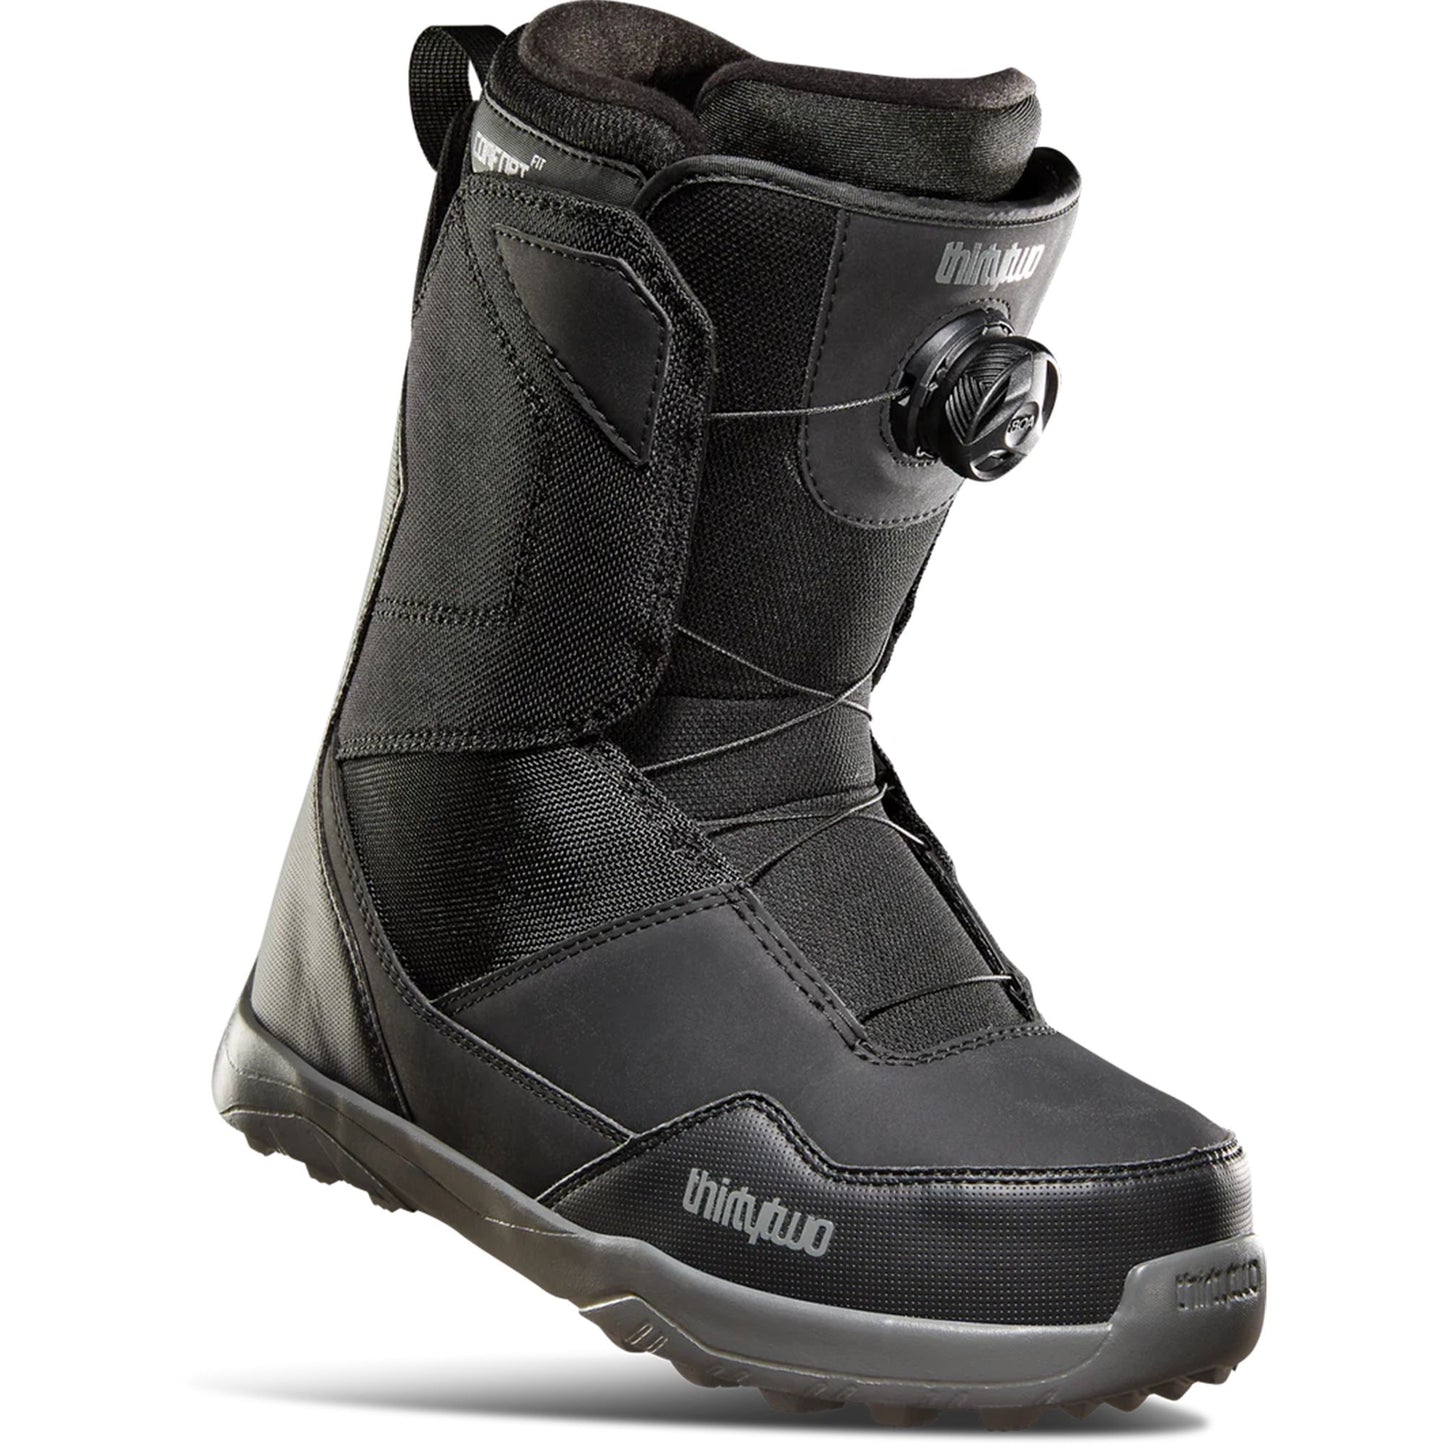 ThirtyTwo Shifty BOA Snowboard Boots - OpenBox Black 13 Snowboard Boots